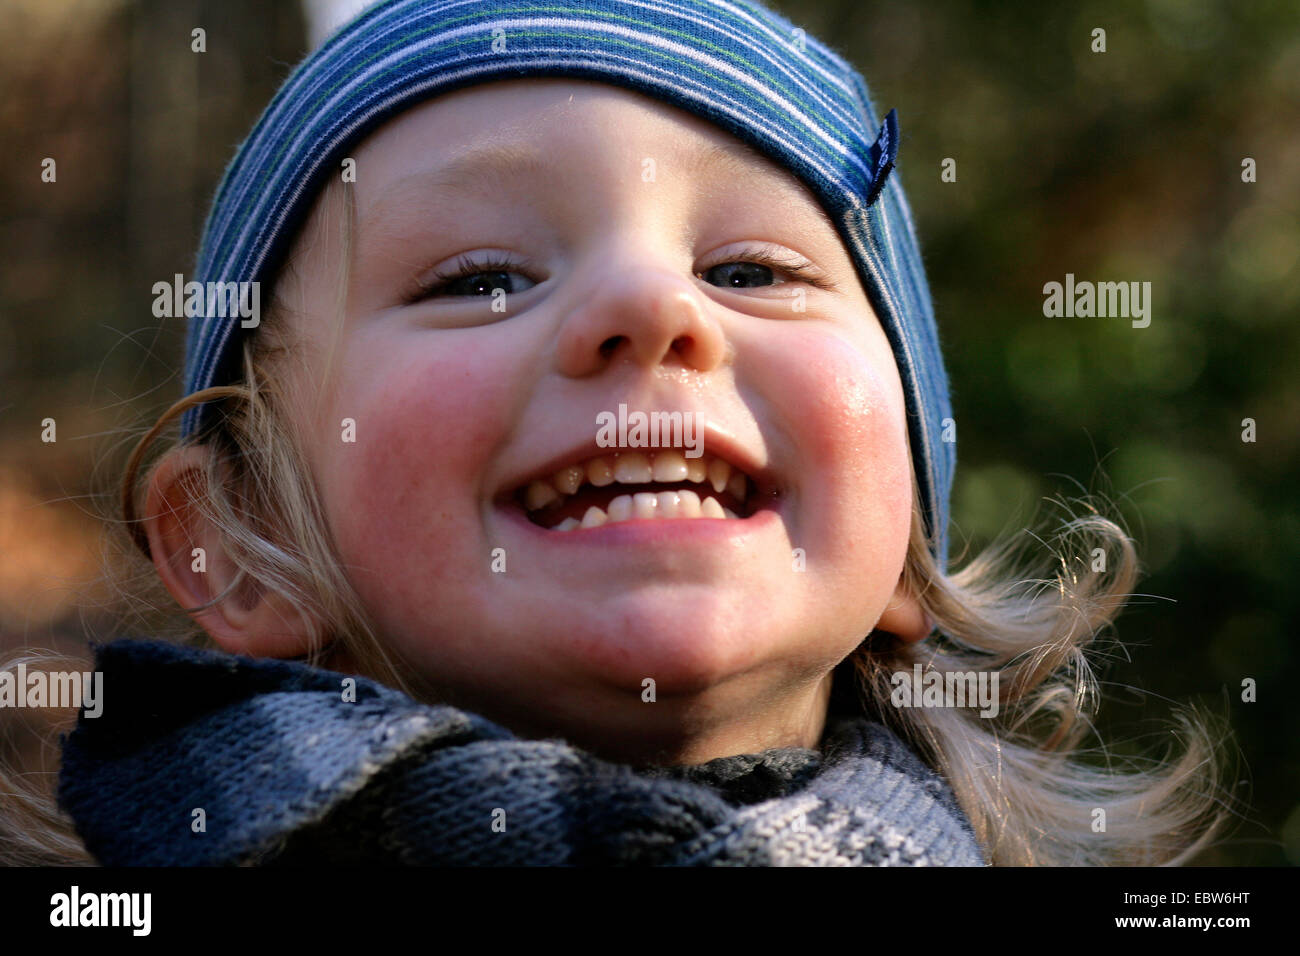 little boy laughing at camera Stock Photo